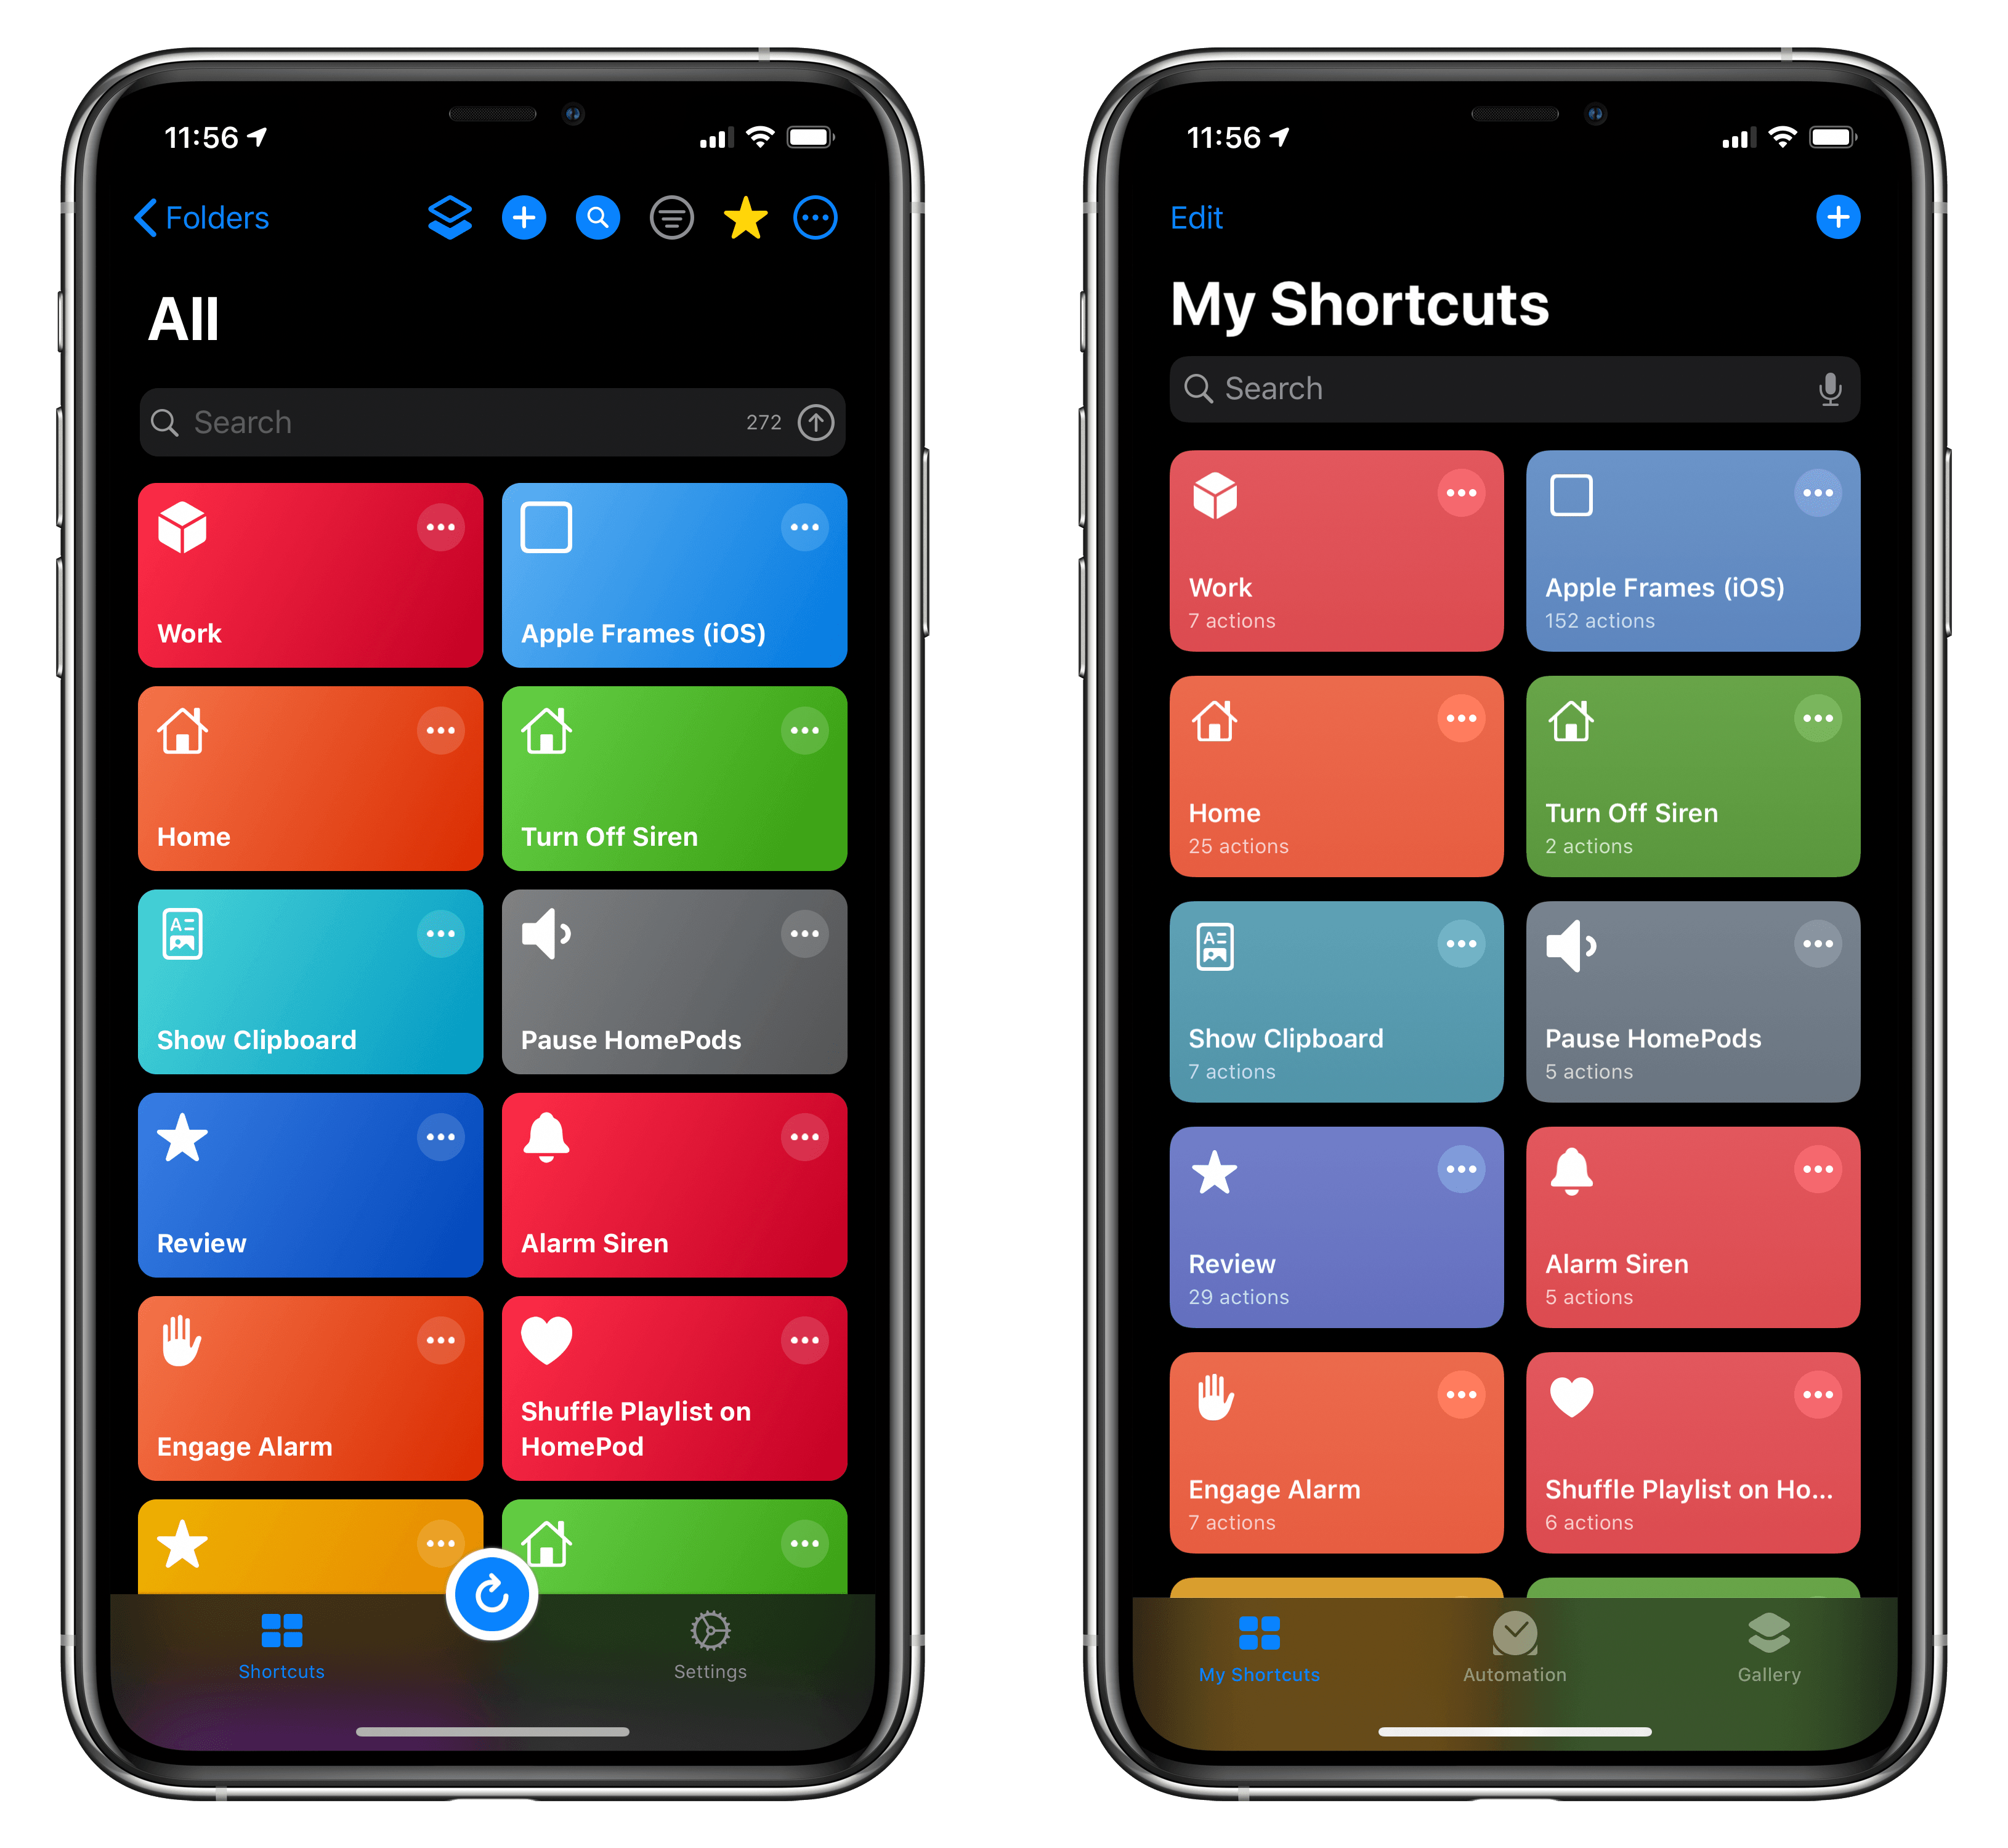 Bright colors look better in dark mode than Apple's new colors.